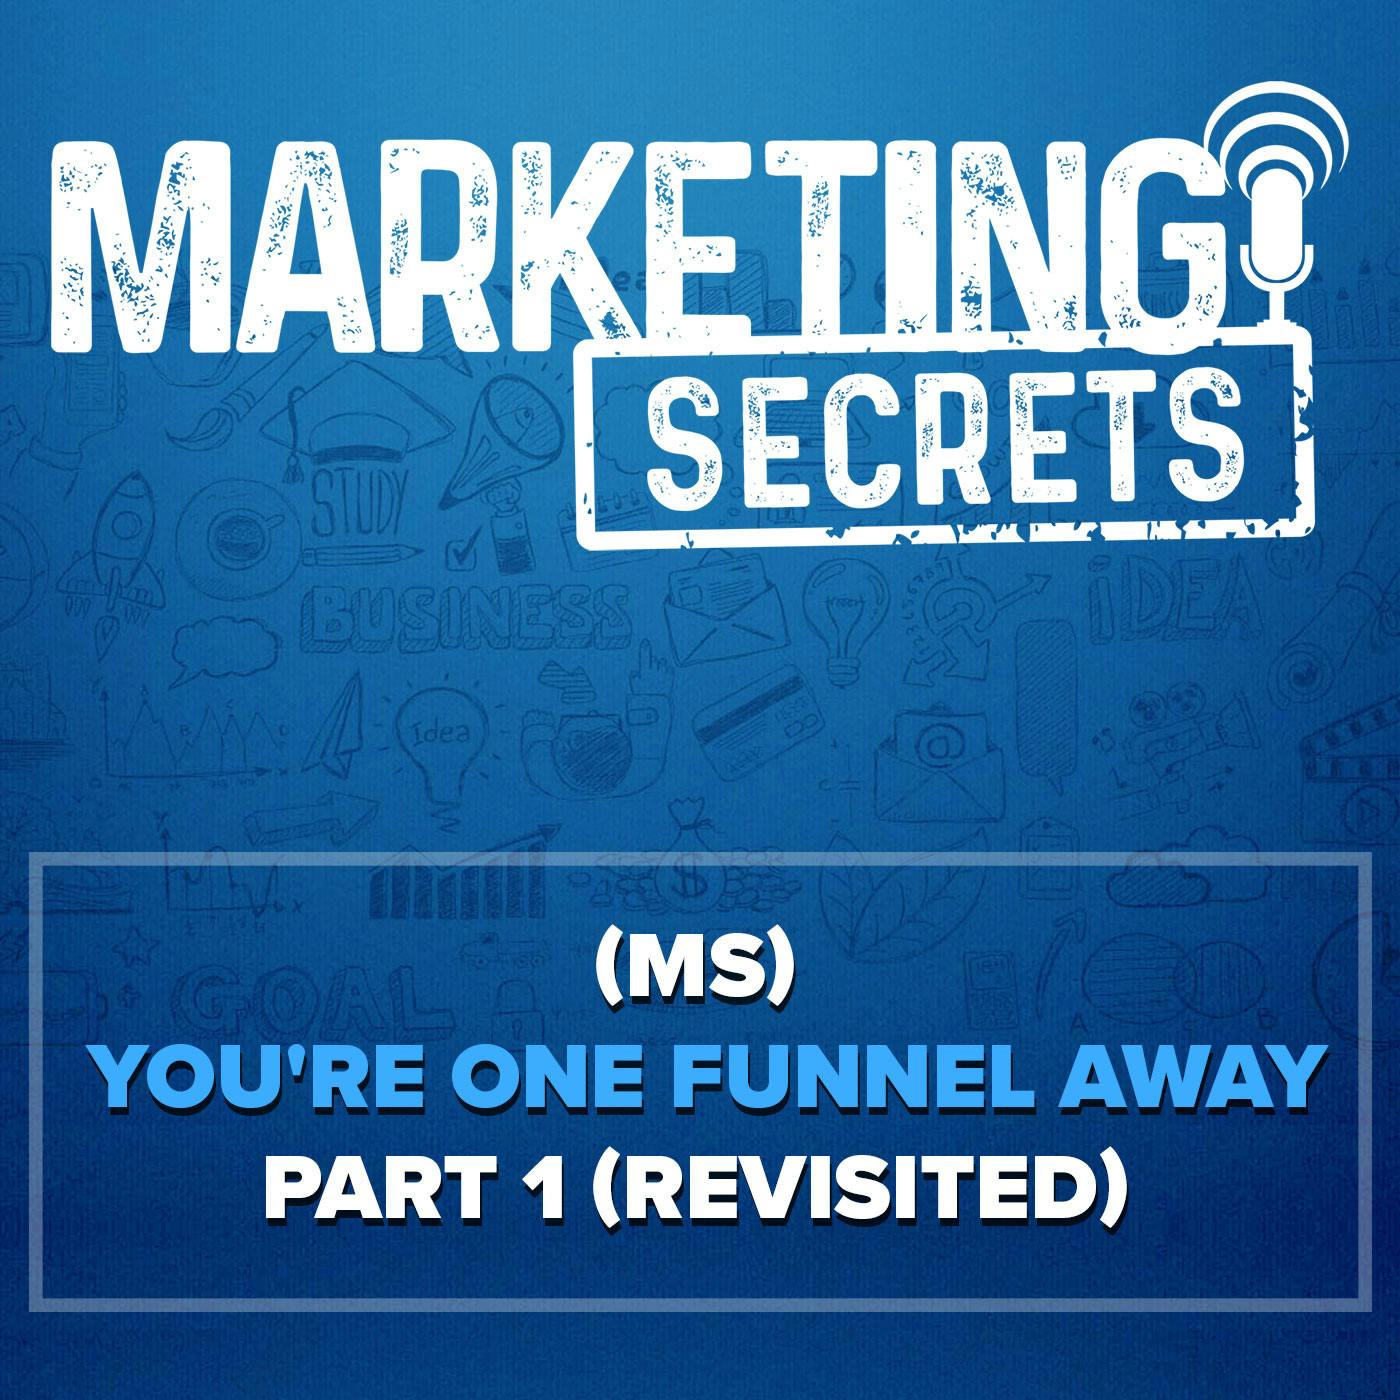 (MS) You're One Funnel Away - Part 1 (Revisited)